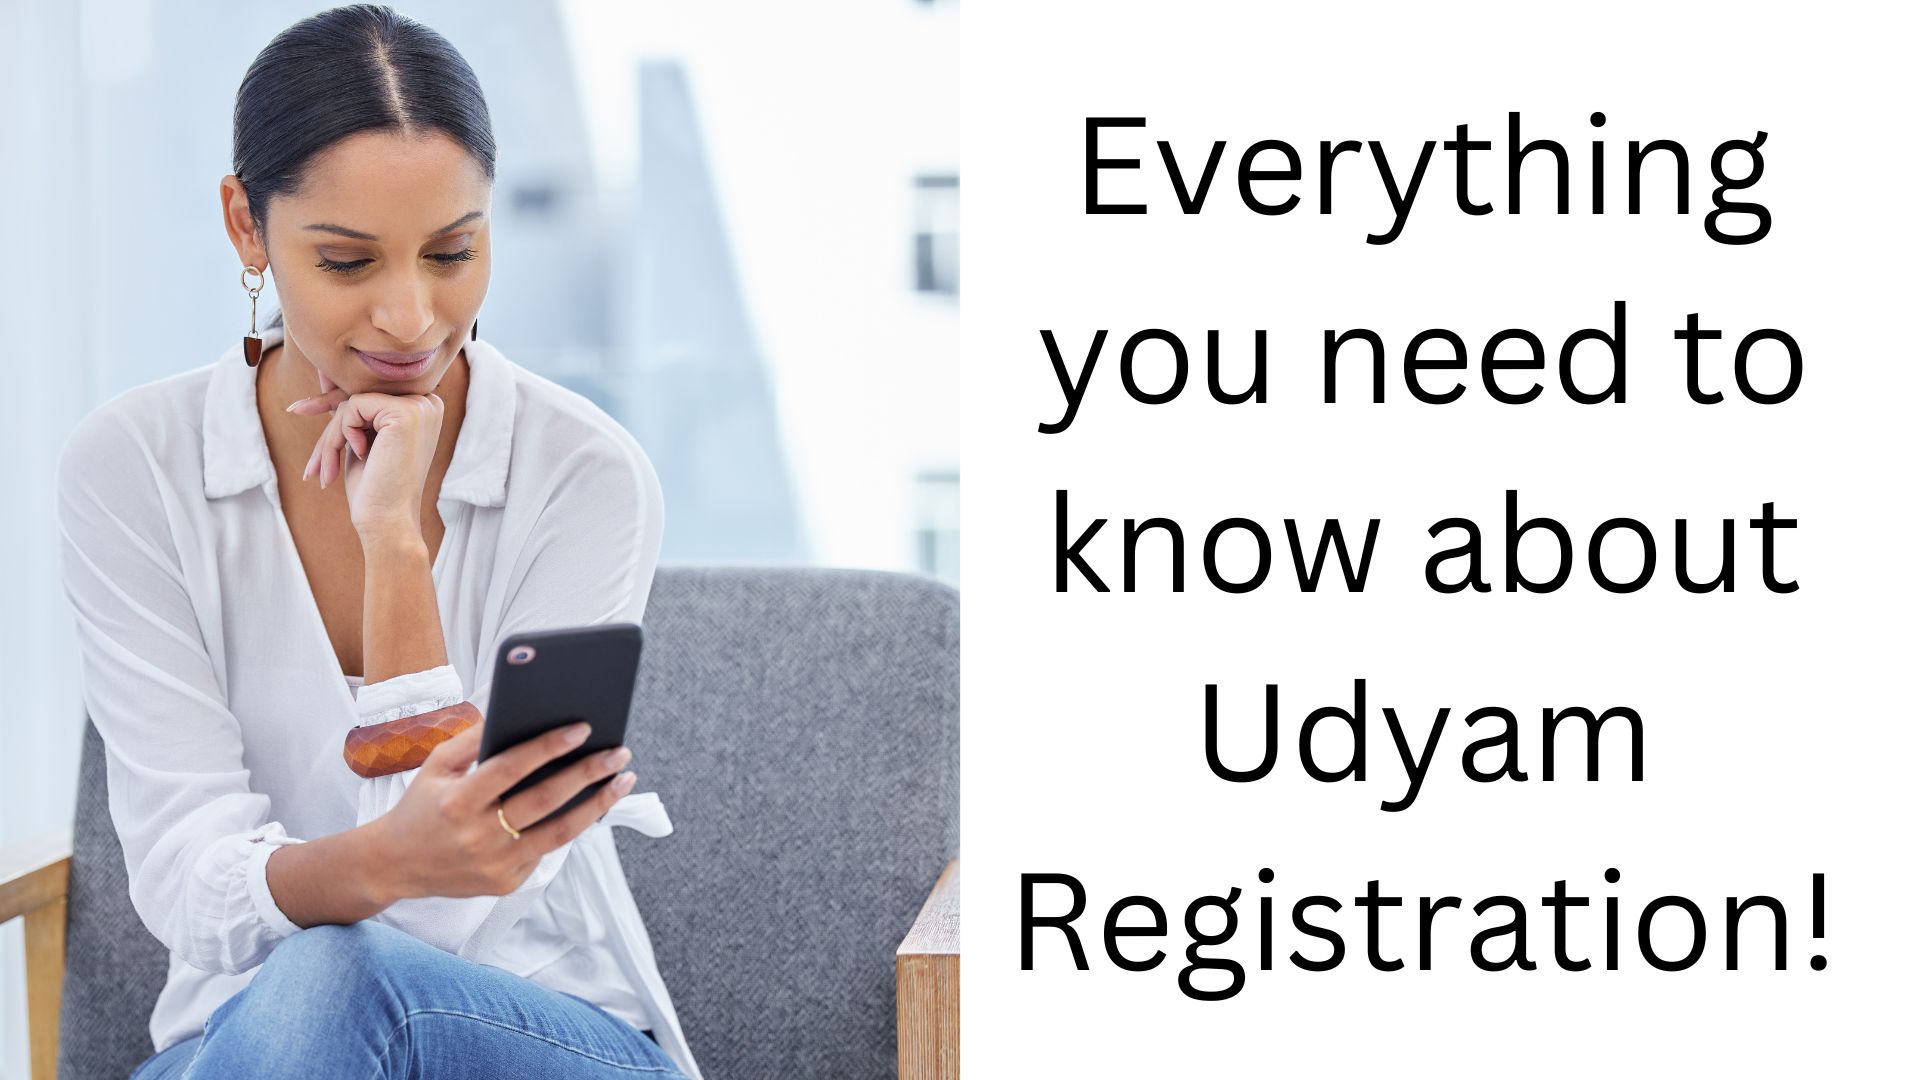 Everything you need to know about Udyam Registration!